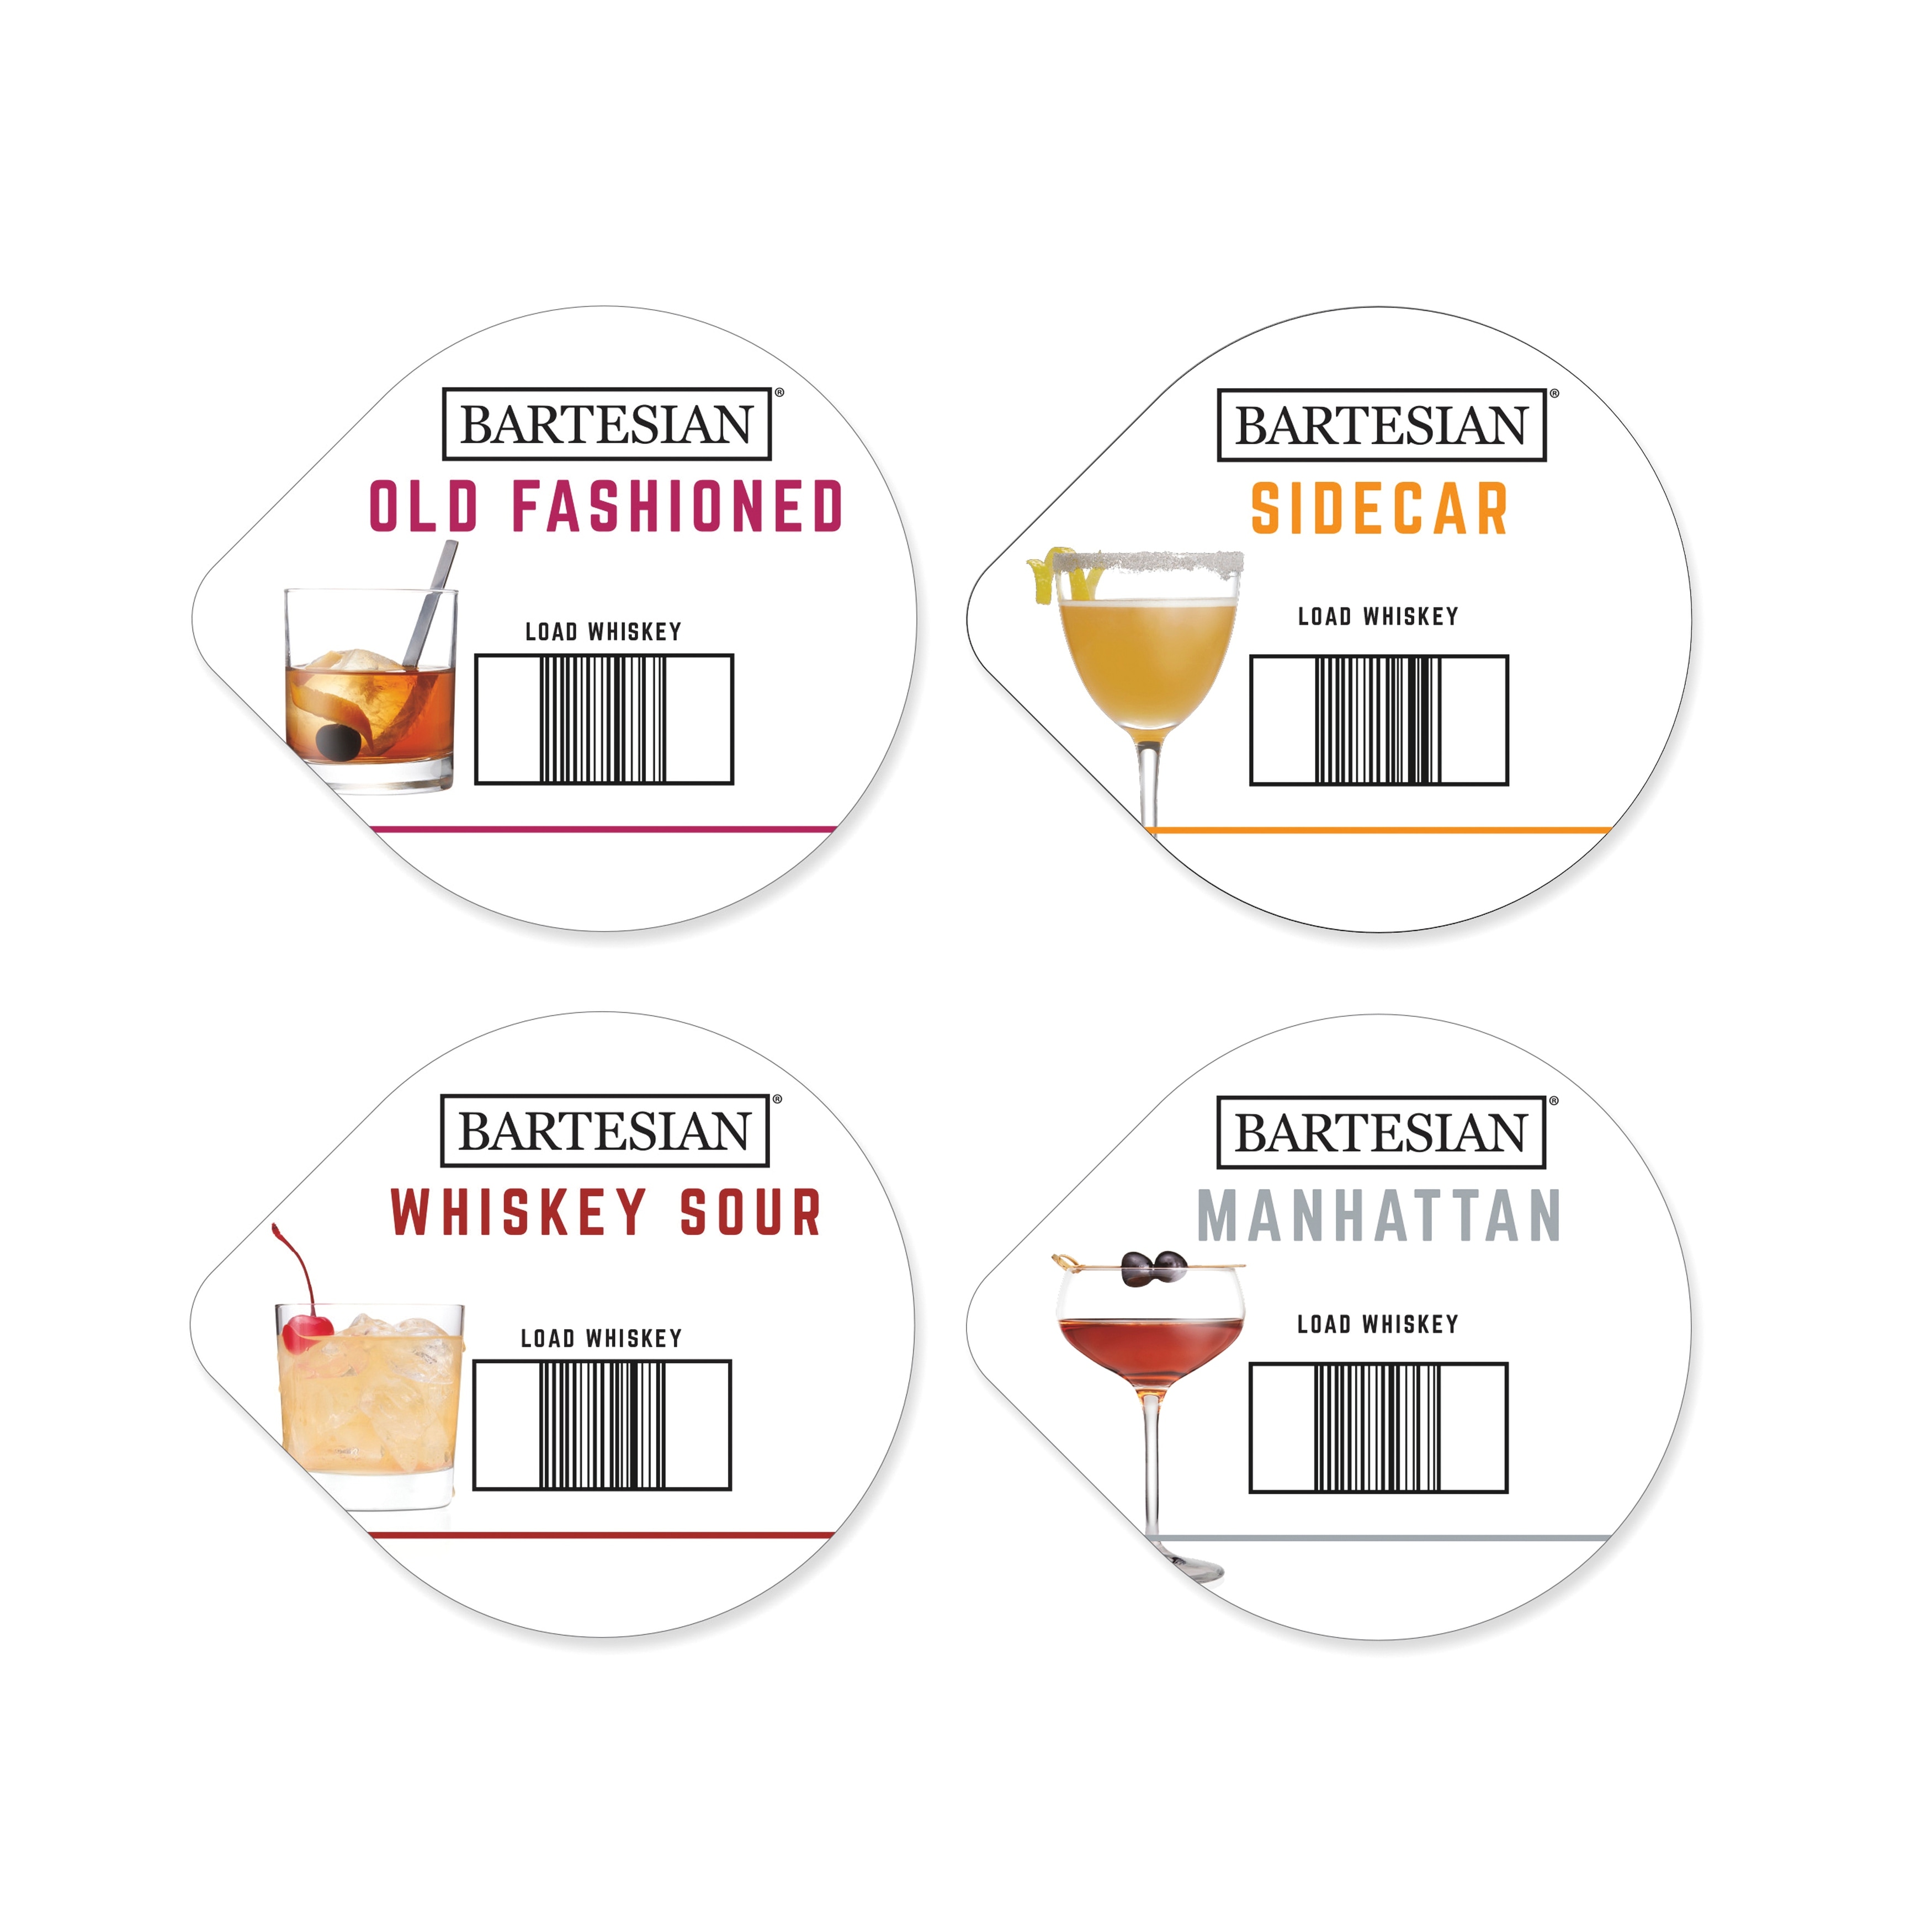 Whiskey Lovers Variety Pack